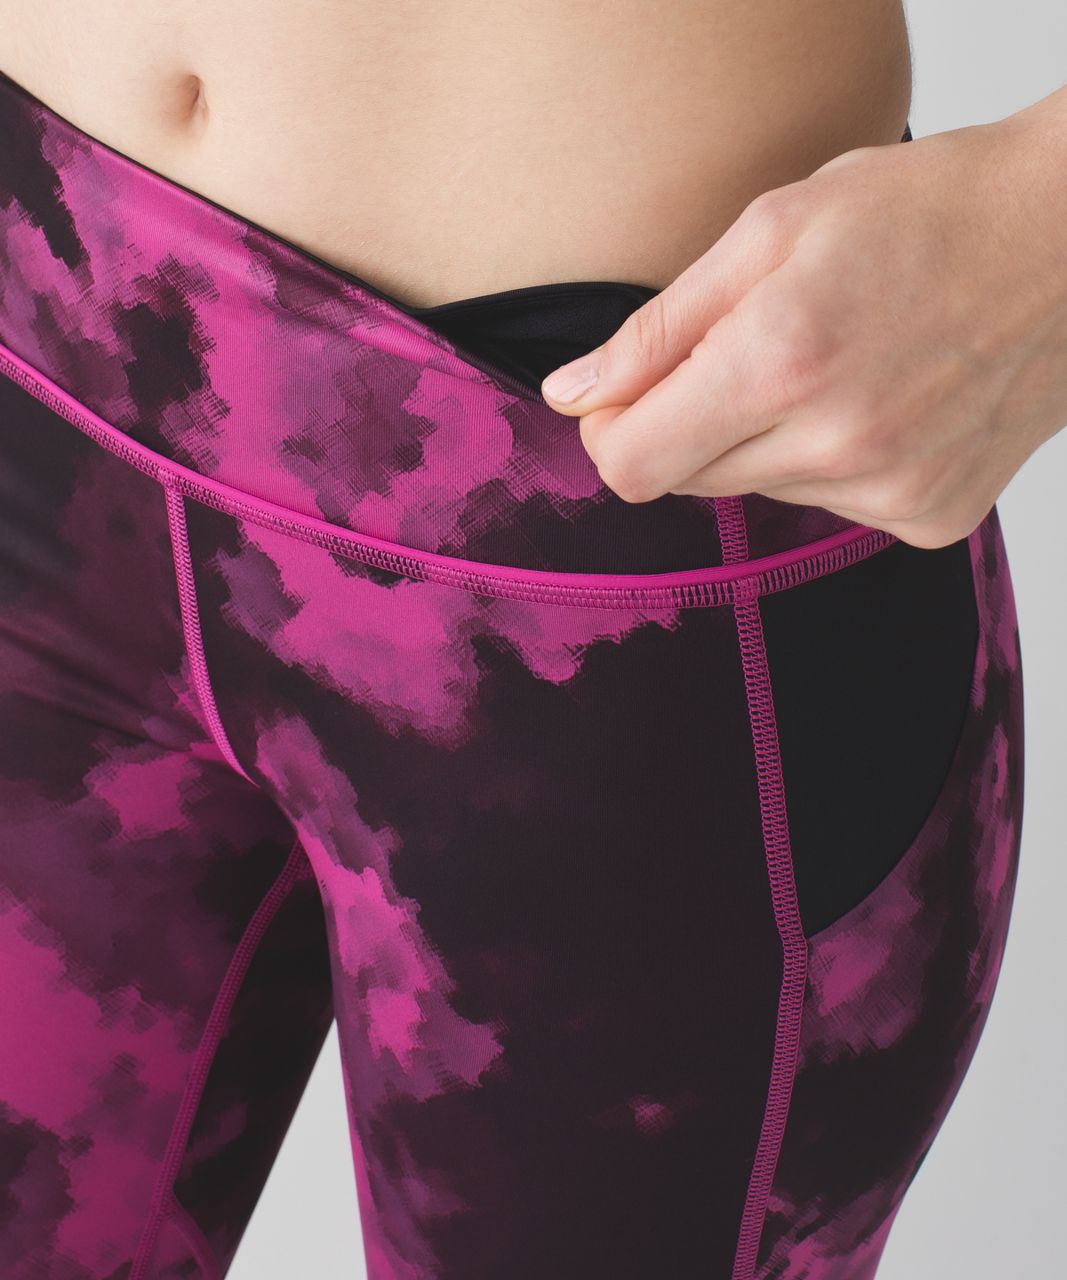 Lululemon Pace Rival Crop *Full-On Luxtreme - Blooming Pixie Raspberry Black / Raspberry